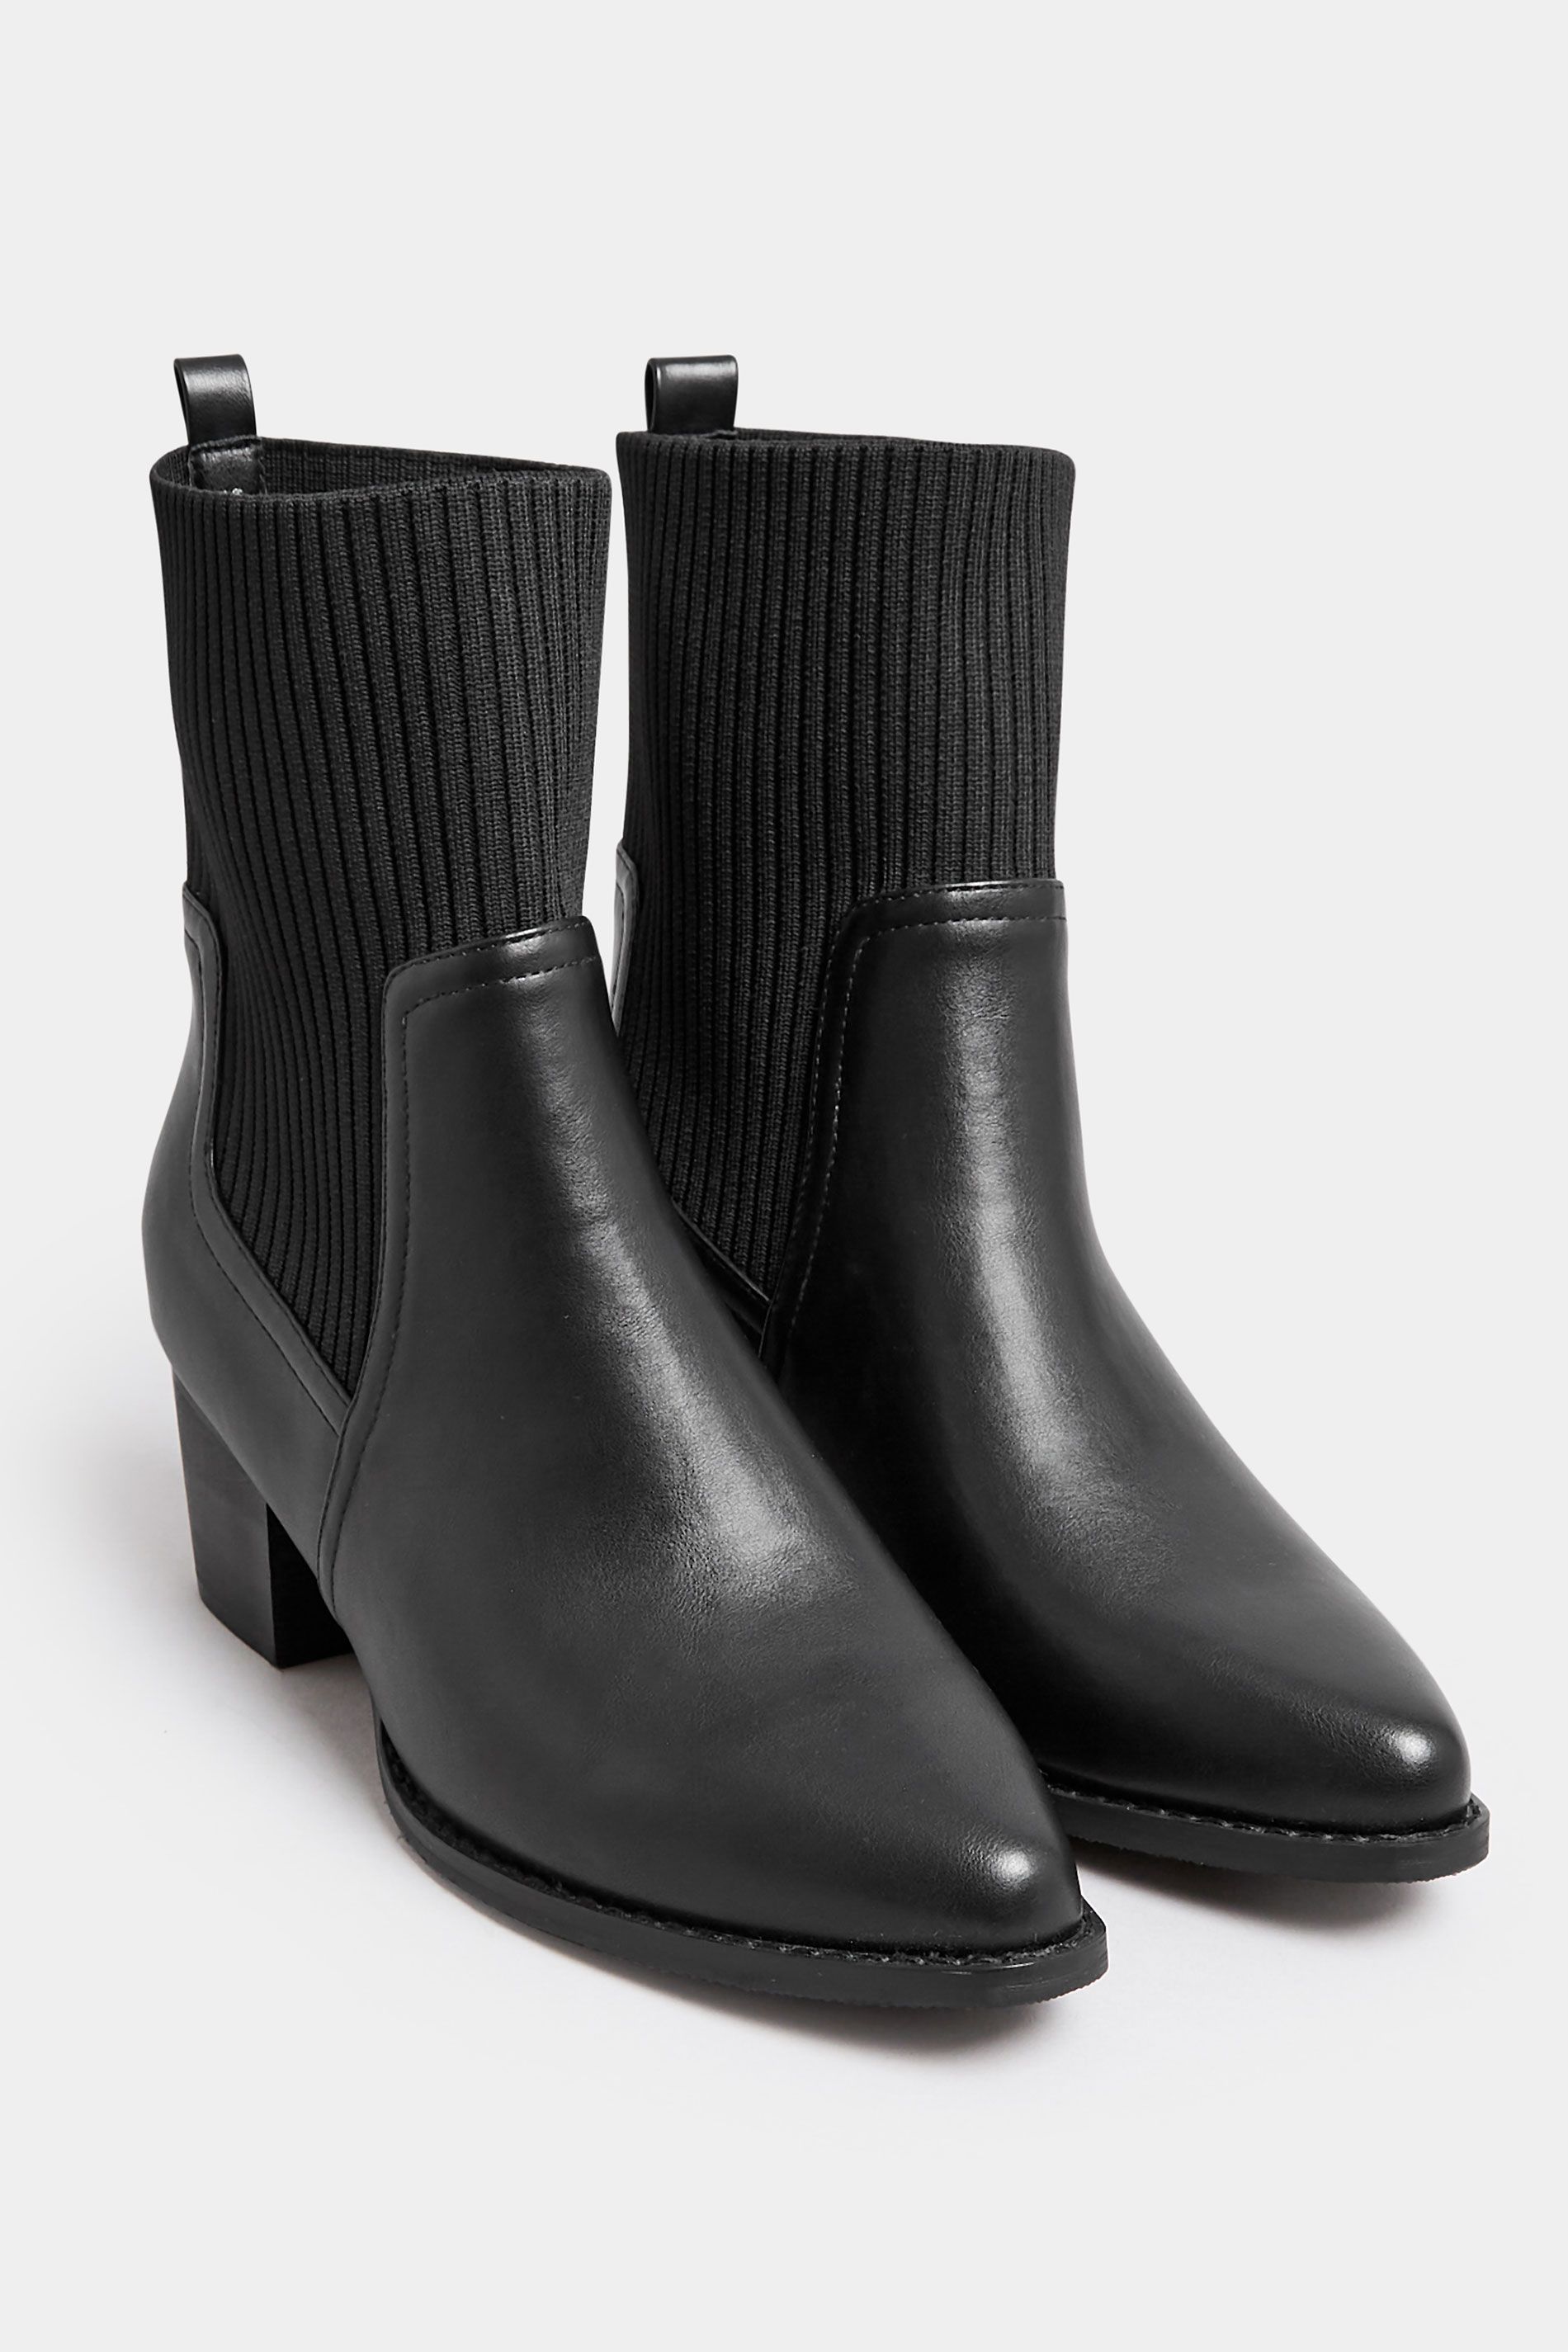 LIMITED COLLECTION Black Sock Top Line Western Boots In EEE Fit | Long Tall Sally